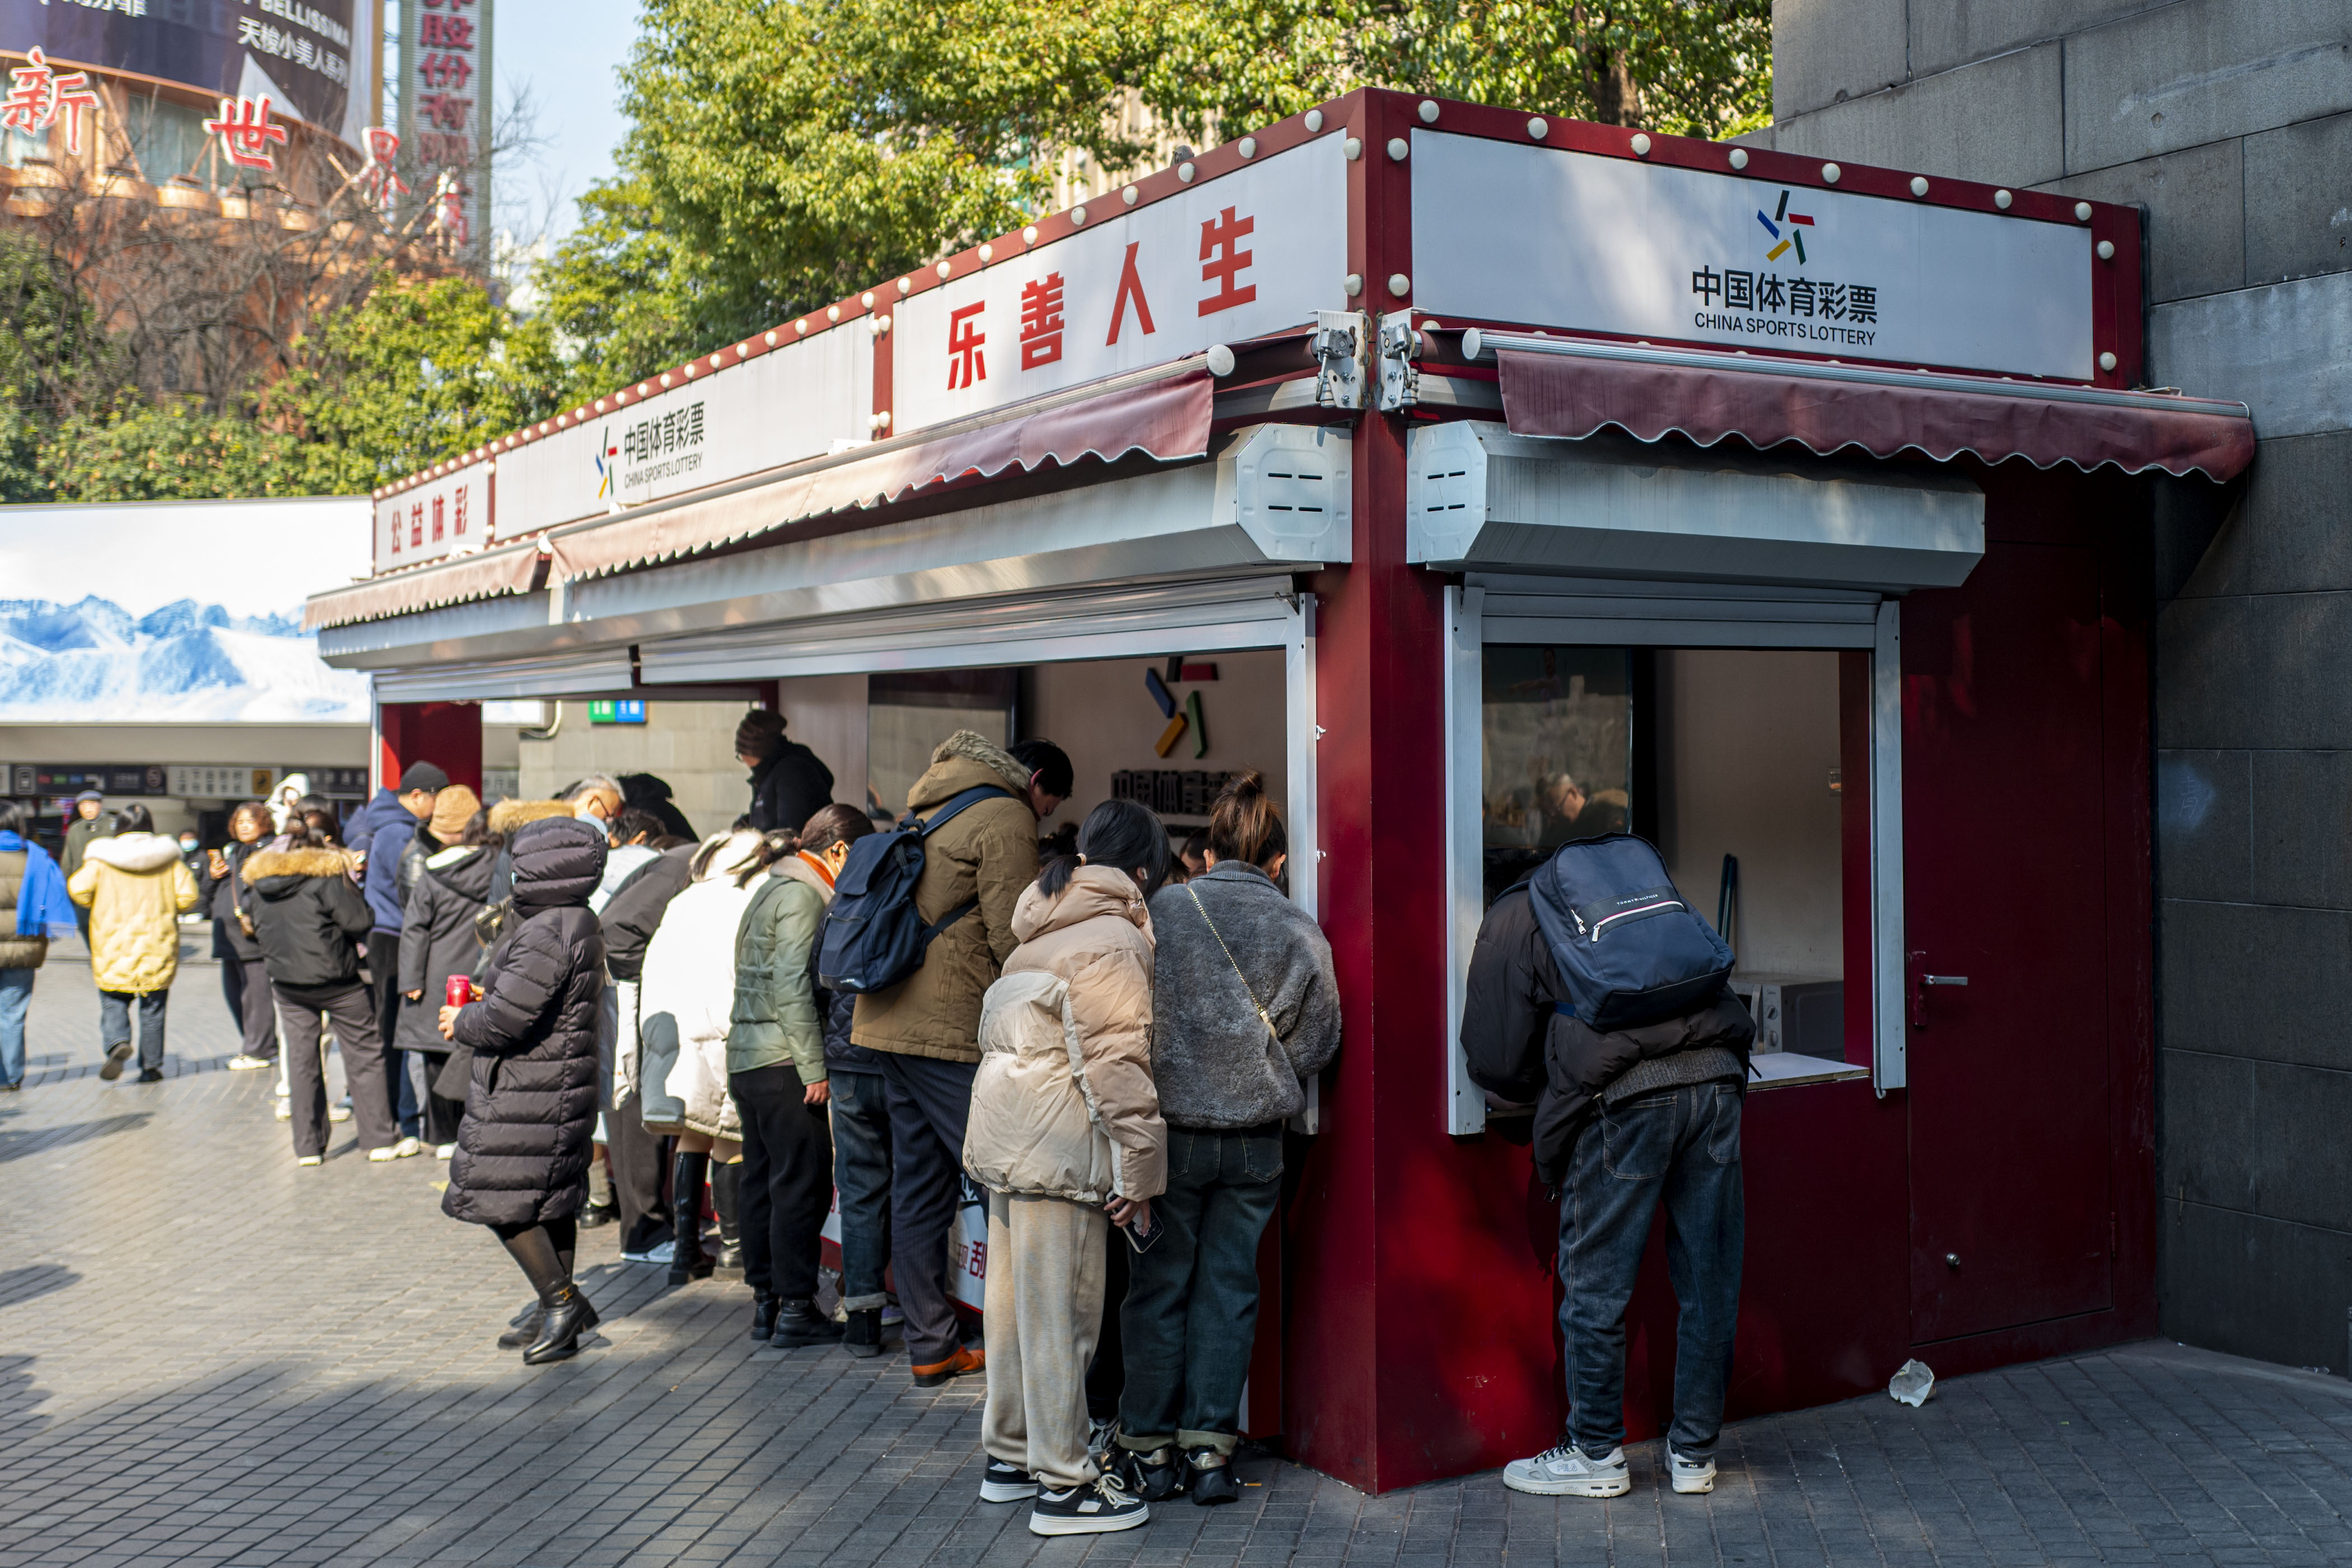 People purchase lottery tickets at a kiosk in Shanghai on Jan .26.